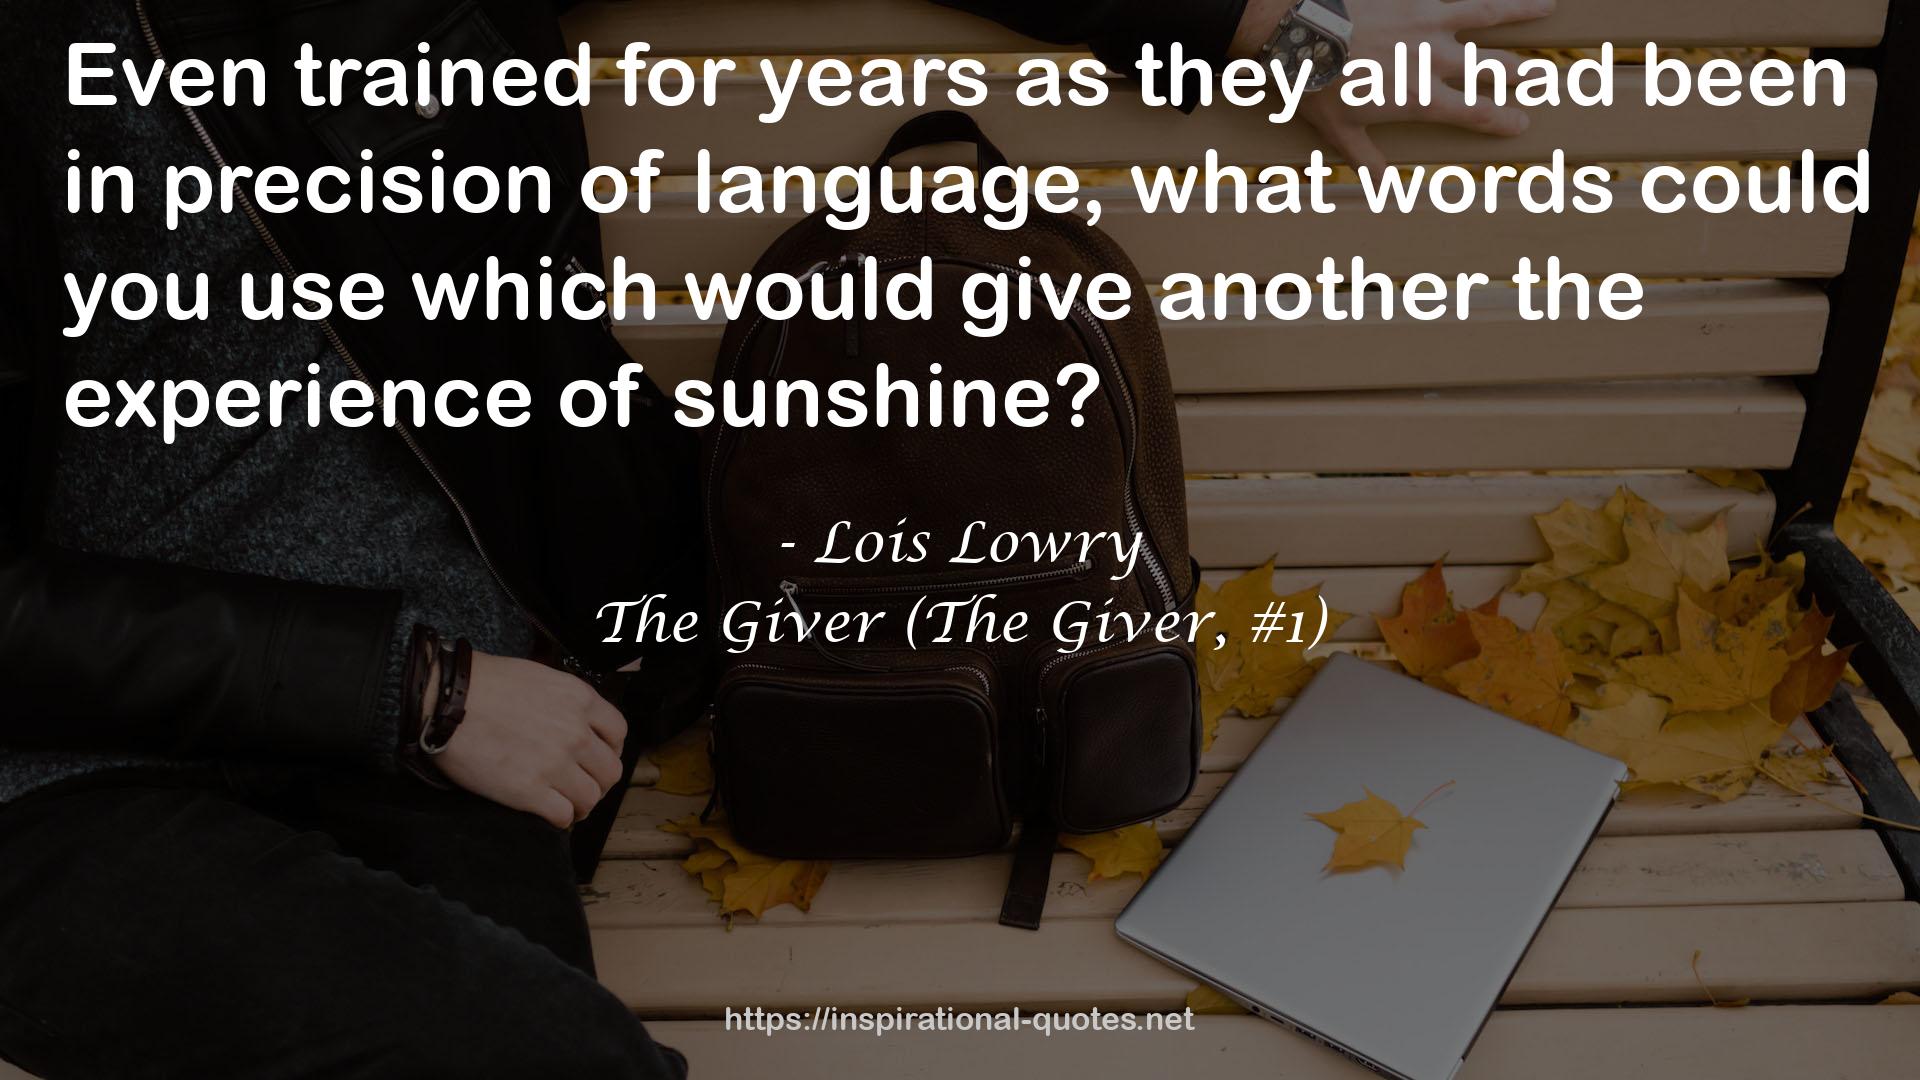 The Giver (The Giver, #1) QUOTES